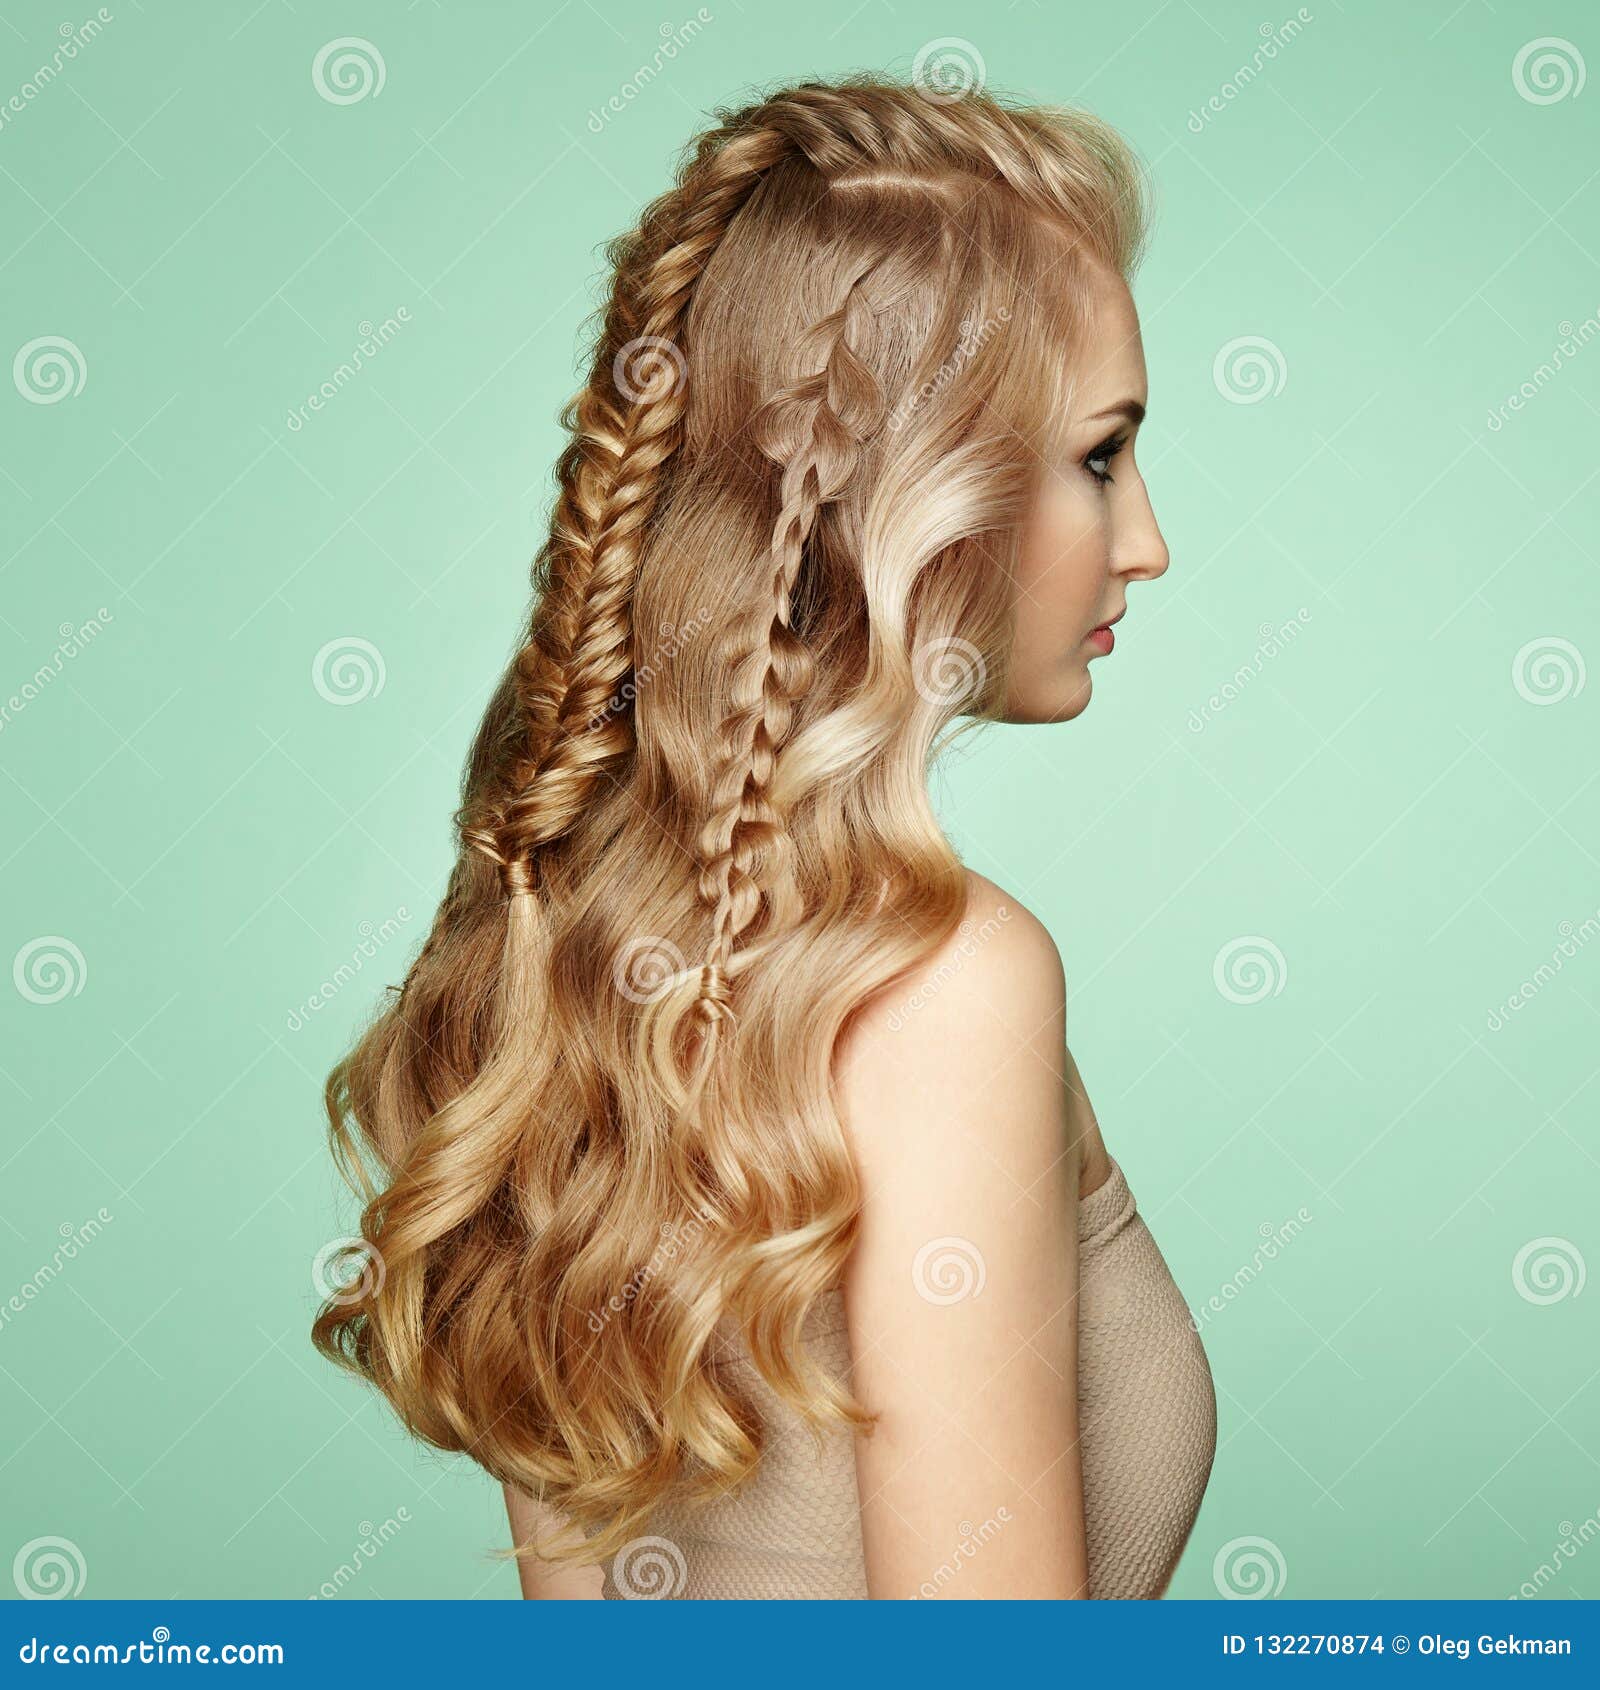 Blonde Girl with Long and Shiny Curly Hair Stock Photo - Image of elegant,  portrait: 132270874